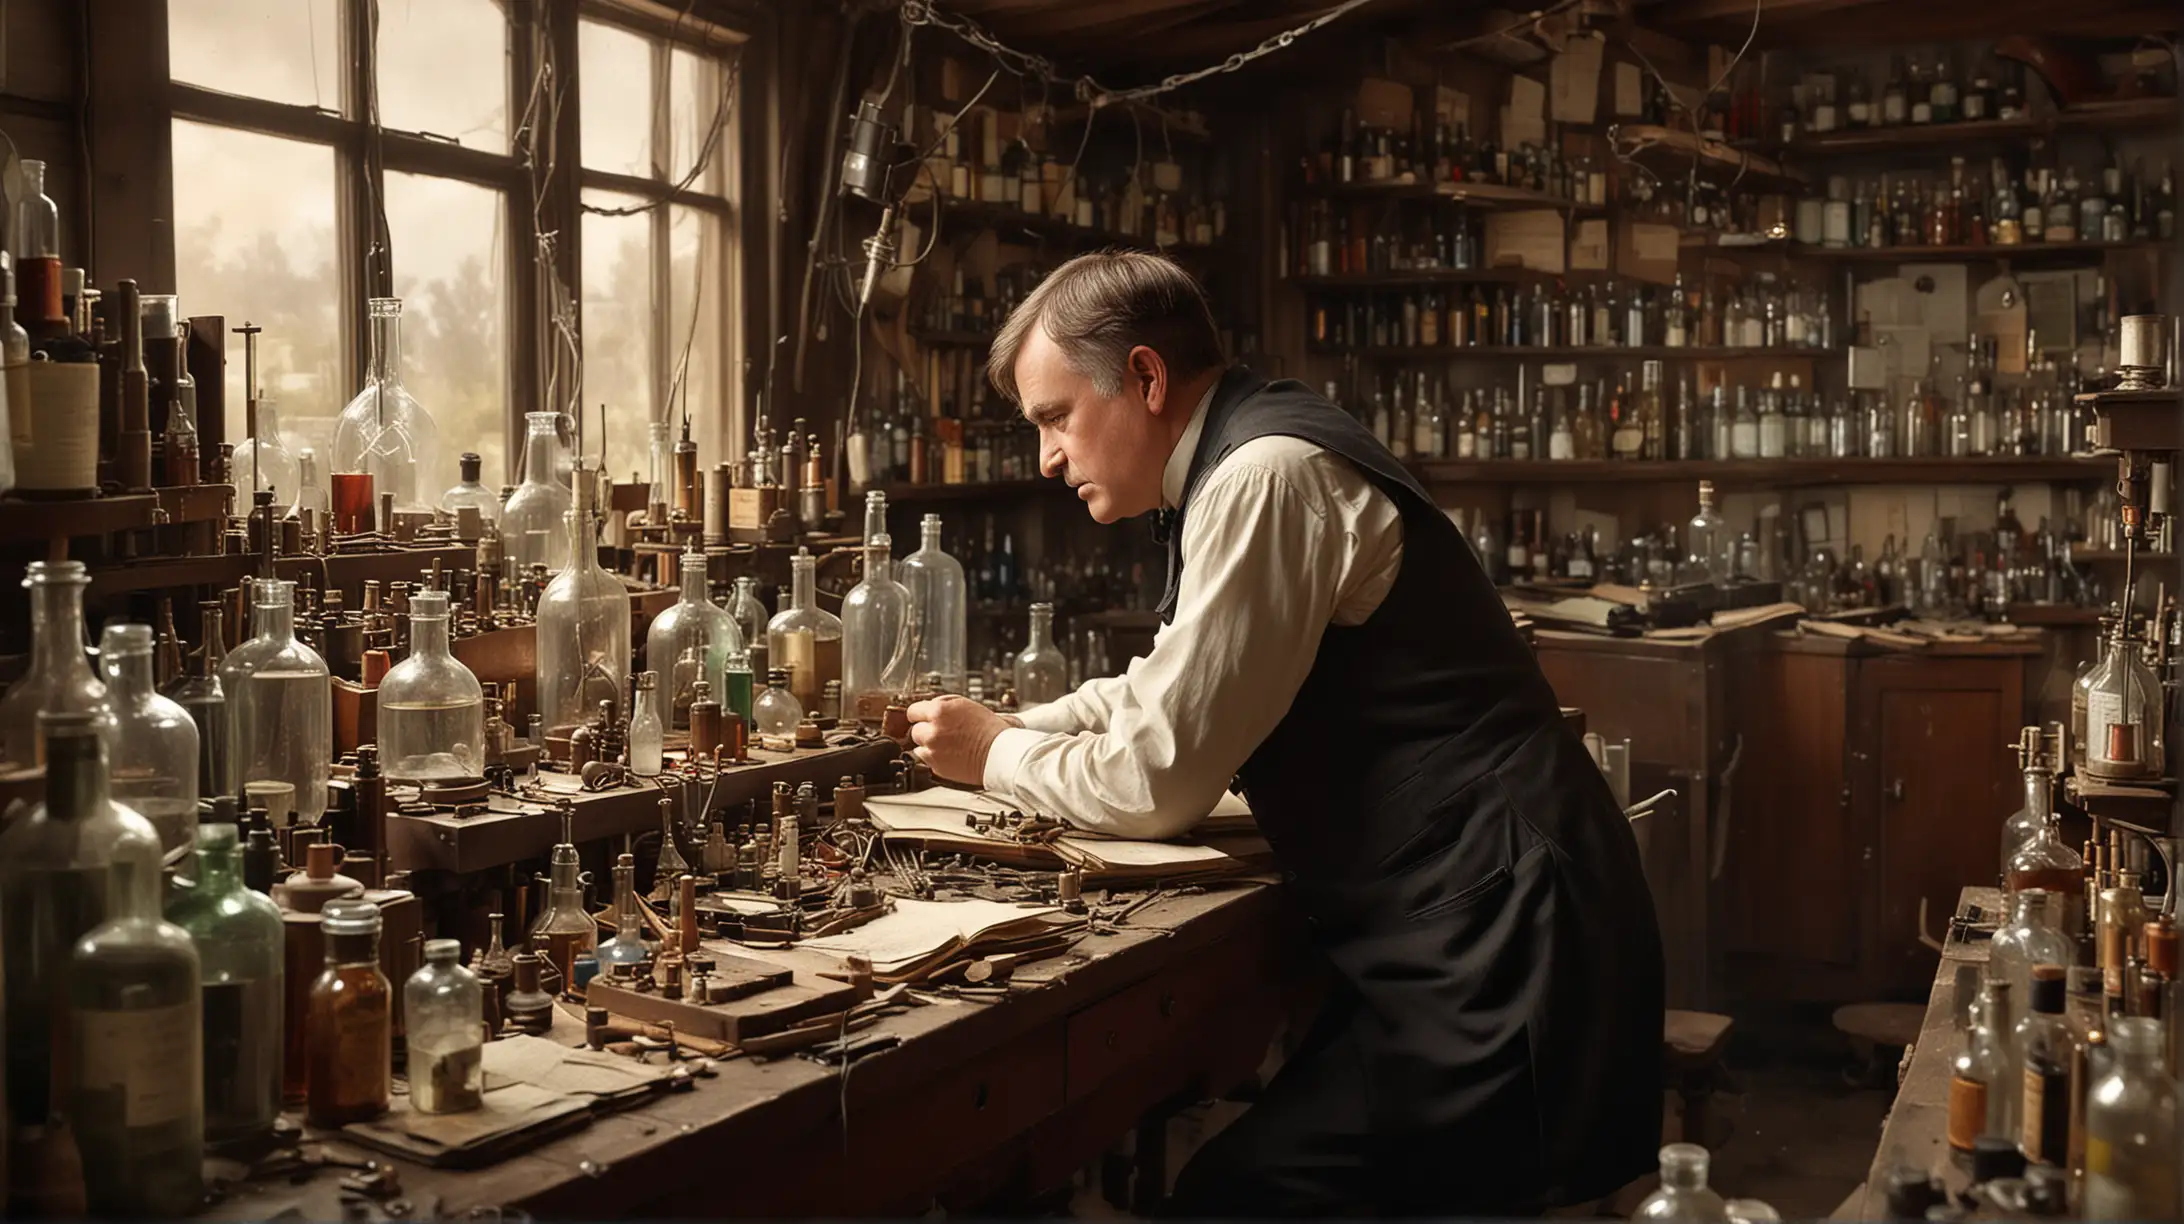 General Visualization: Illustrate Thomas Edison experimenting in his first lab.
Detailed Image Description: Generate a detailed scene of Thomas Edison in his early twenties, conducting experiments in his rudimentary lab inside a train car. The image should show him amidst a clutter of telegraph parts, chemical bottles, and a small workbench, capturing his dedication and curiosity.